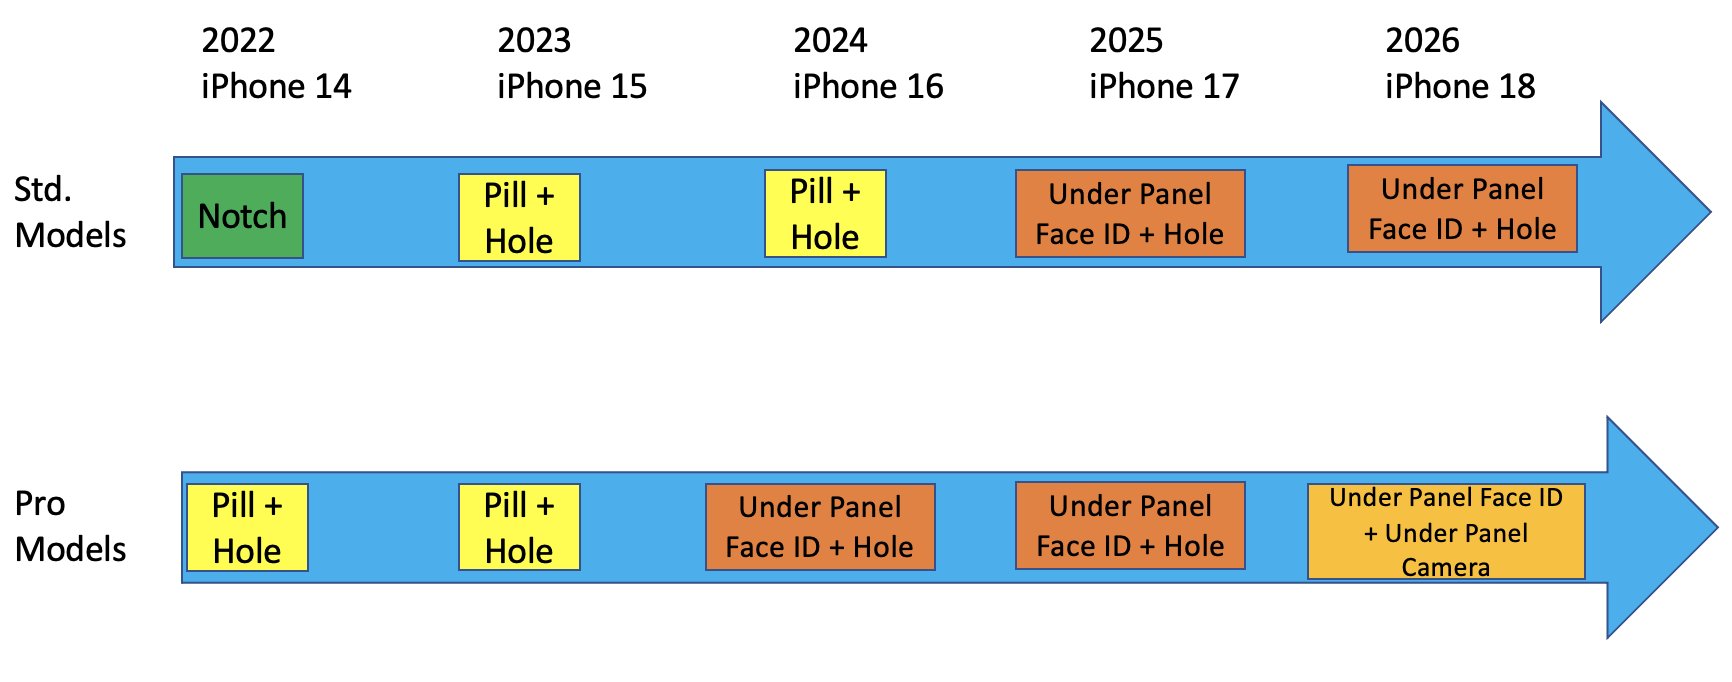 What iPhone will be out in 2026?